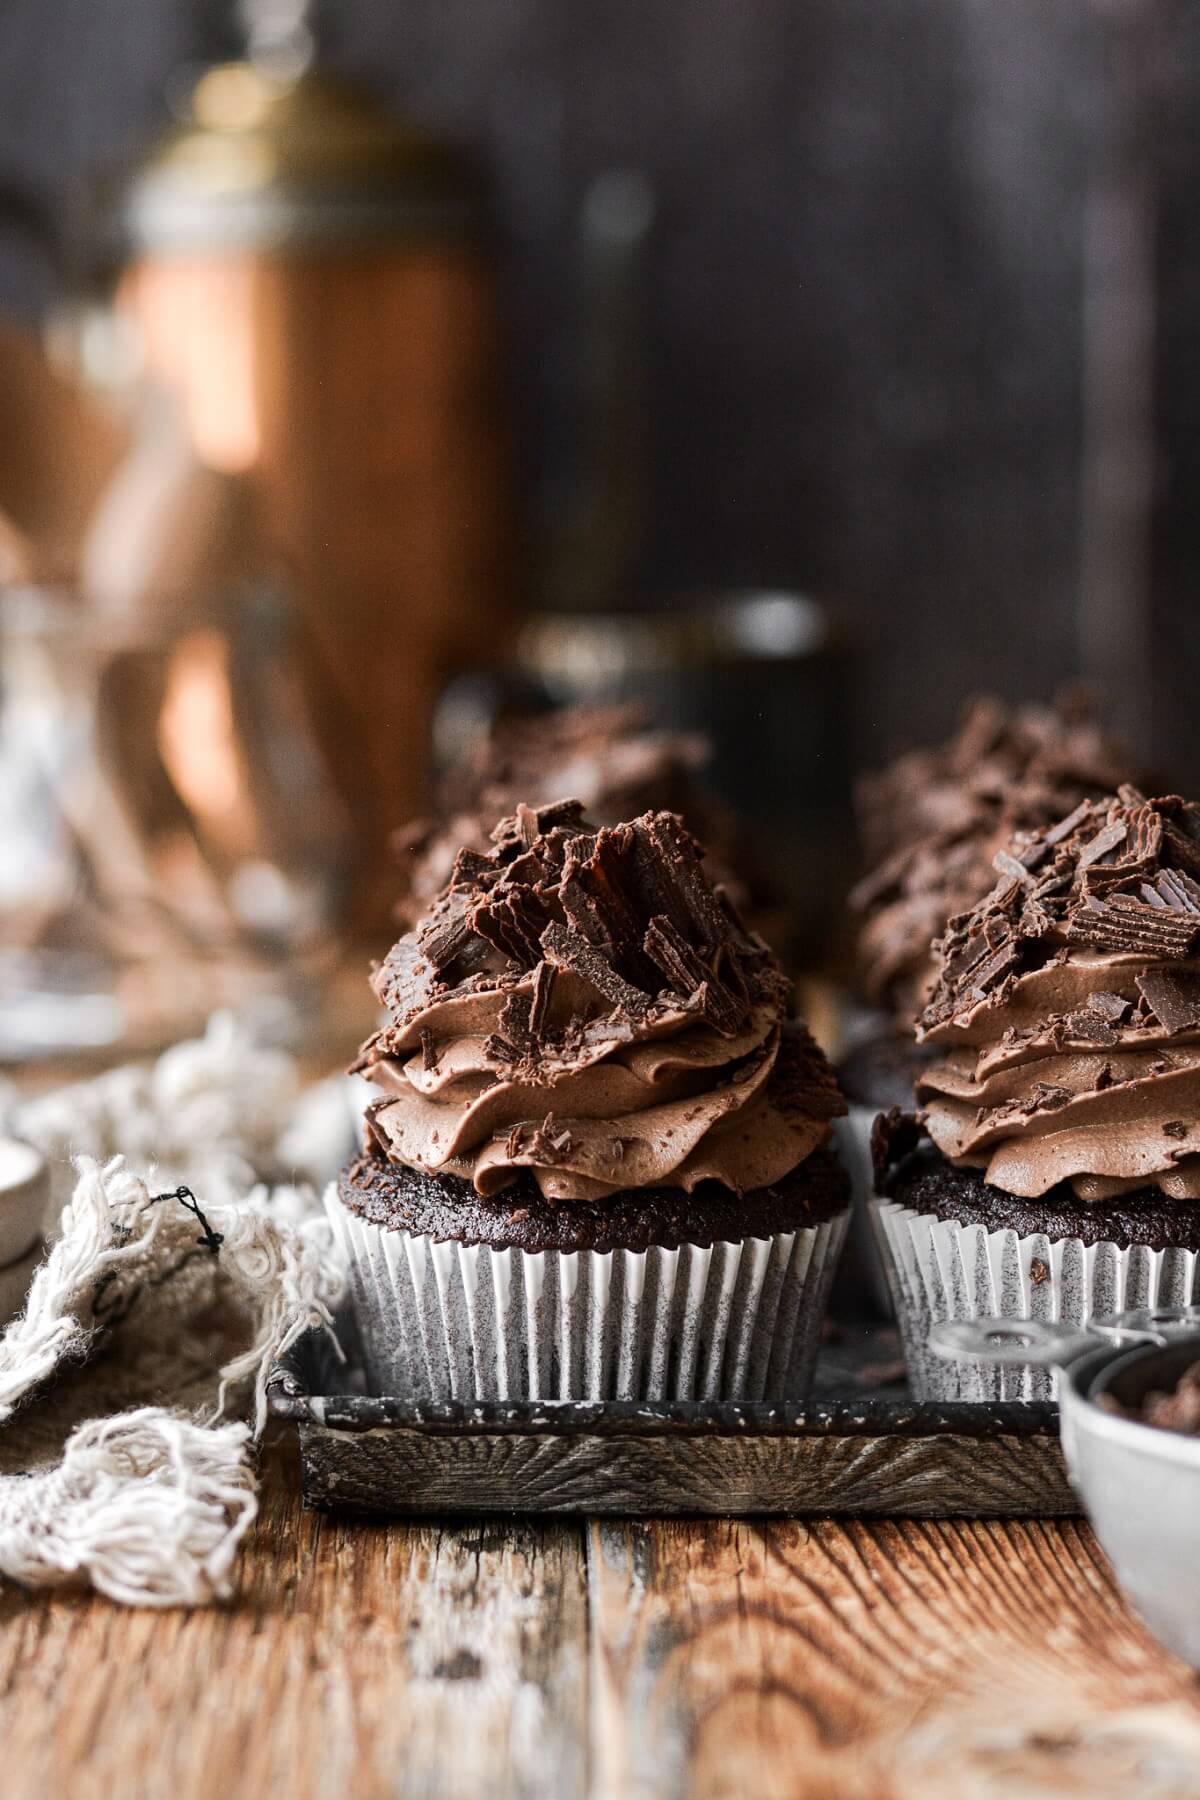 Chocolate cupcakes with espresso buttercream and chocolate shavings.